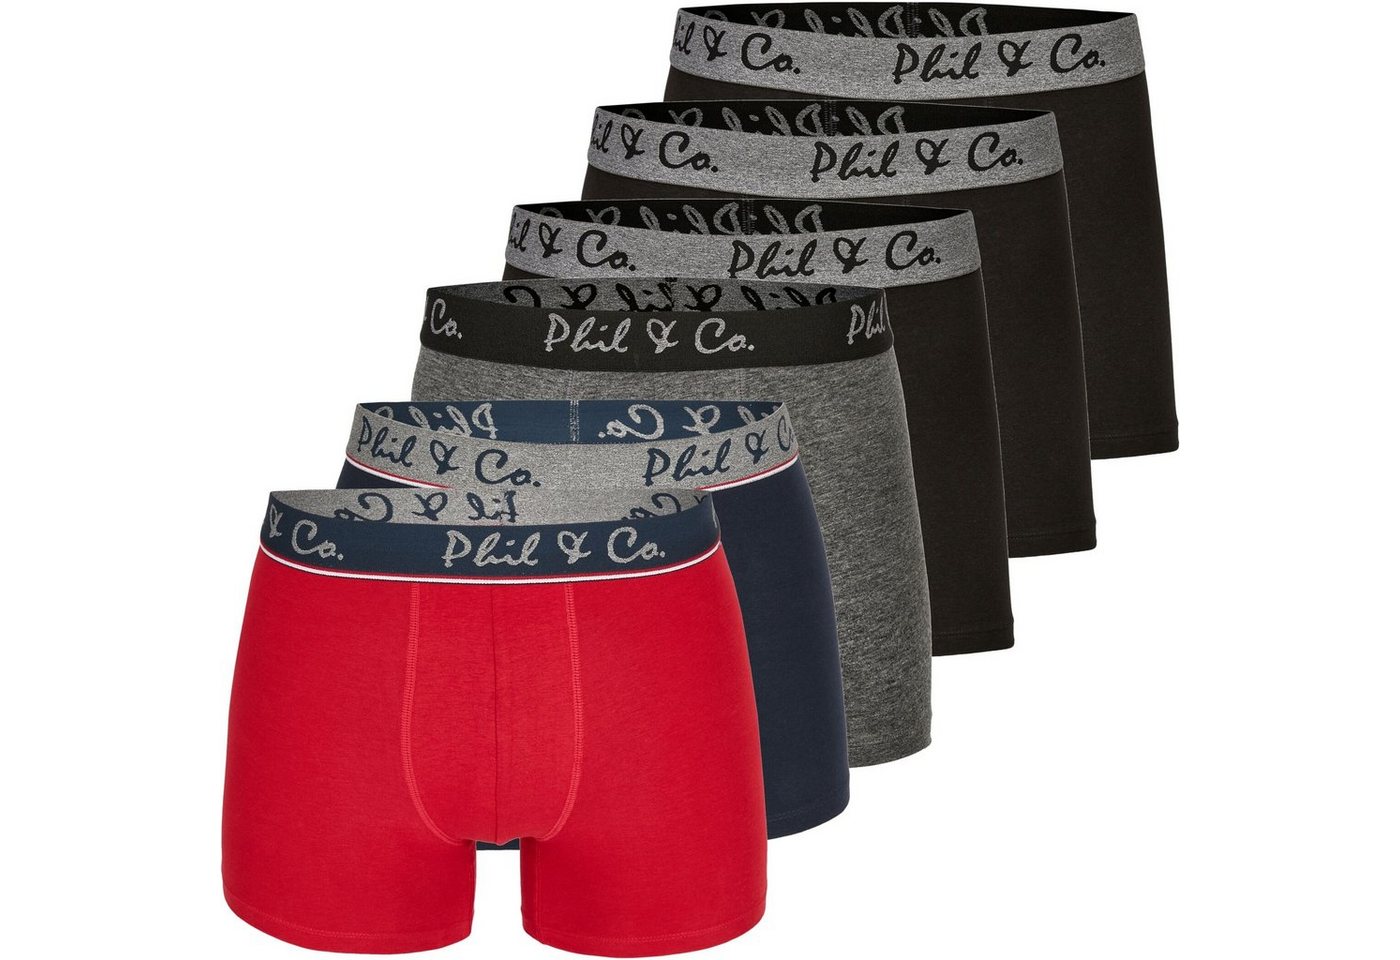 Phil & Co. Boxershorts 6er Pack Phil & Co Berlin Jersey Boxershorts Trunk Short Pant FARBWAHL (1-St) von Phil & Co.